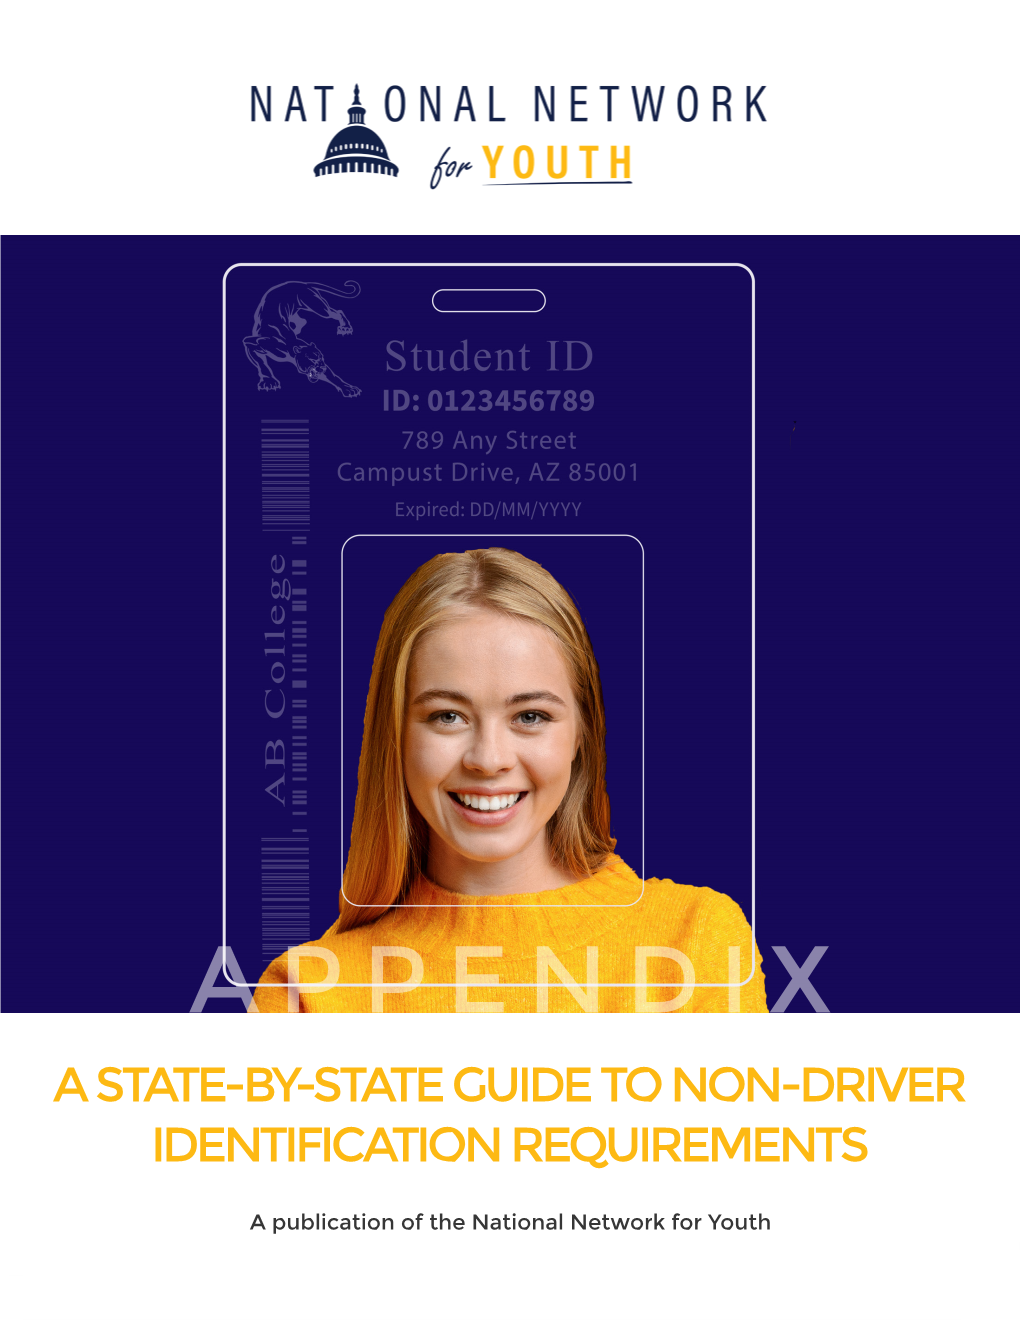 Appendix a State-By-State Guide to Non-Driver Identification Requirements